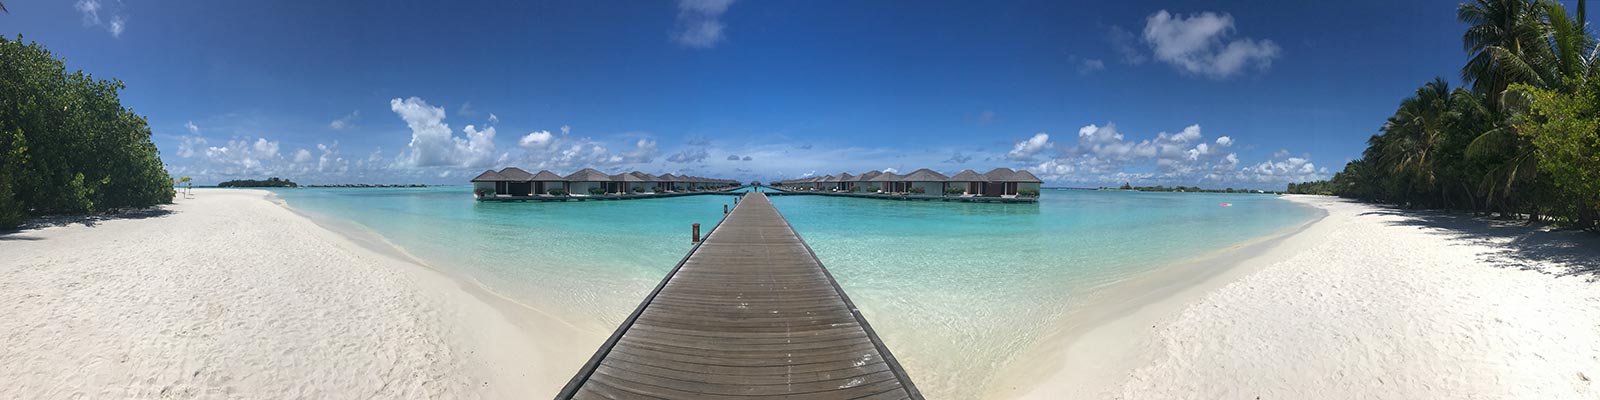 The walkway to the water villa from the beach in Maldives. The Maldives & upgraded to the best villa on the island